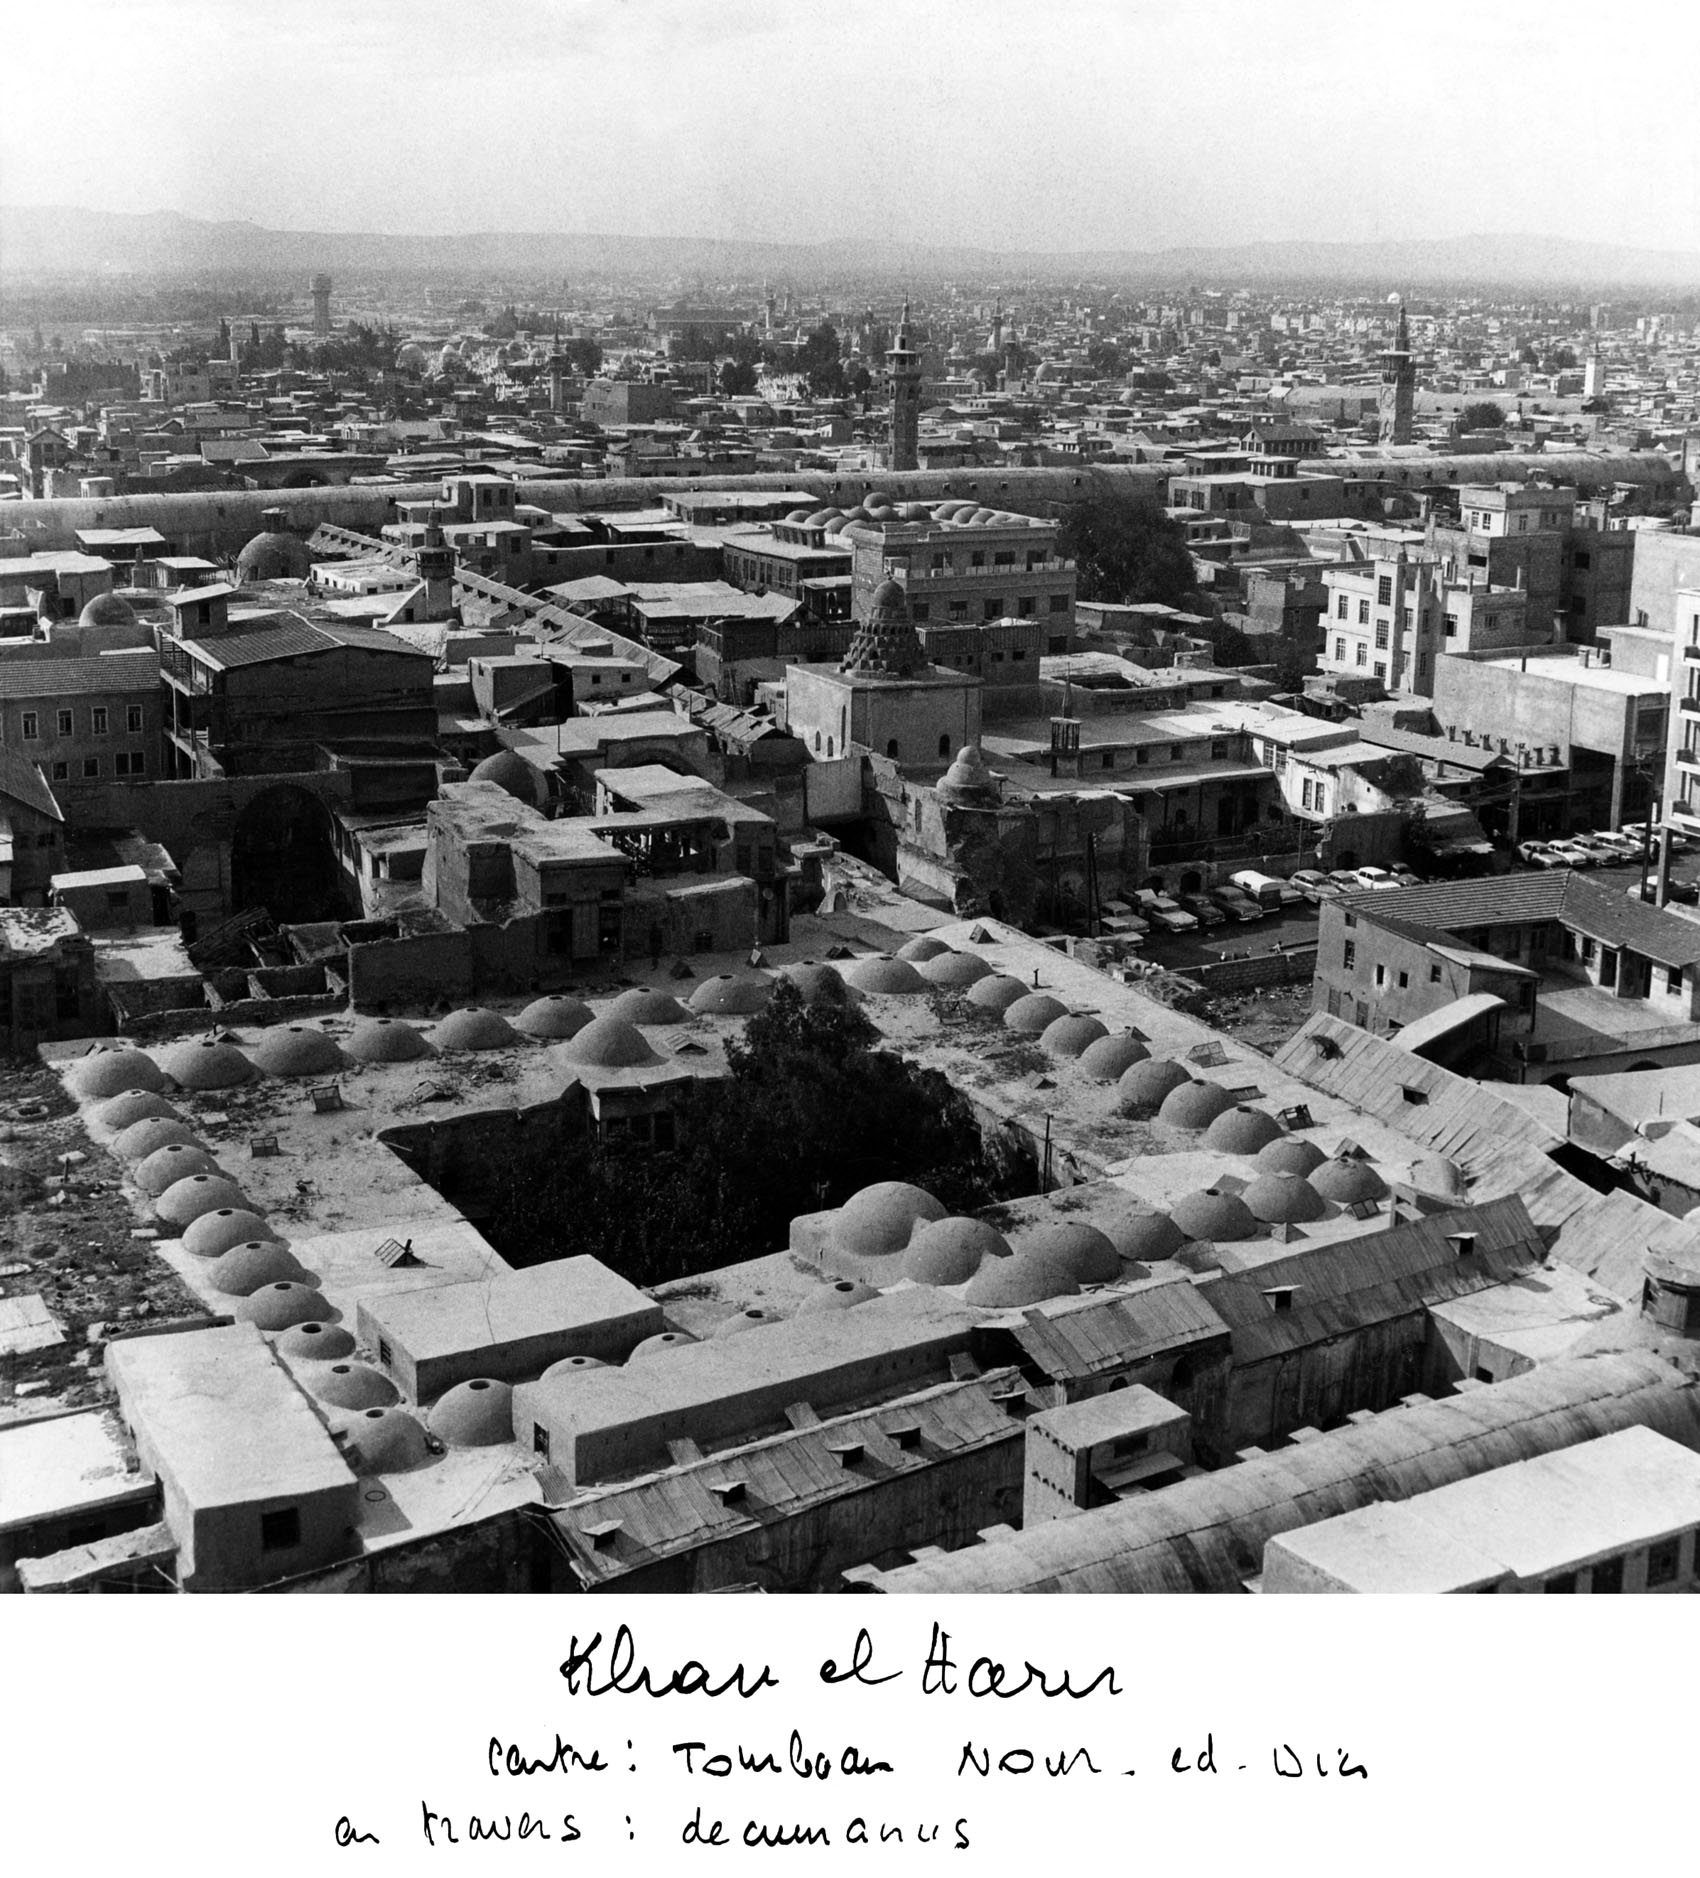 Aerial view of Khan al-Harir, and the Tomb of Nour ed-Din in the center of the photo